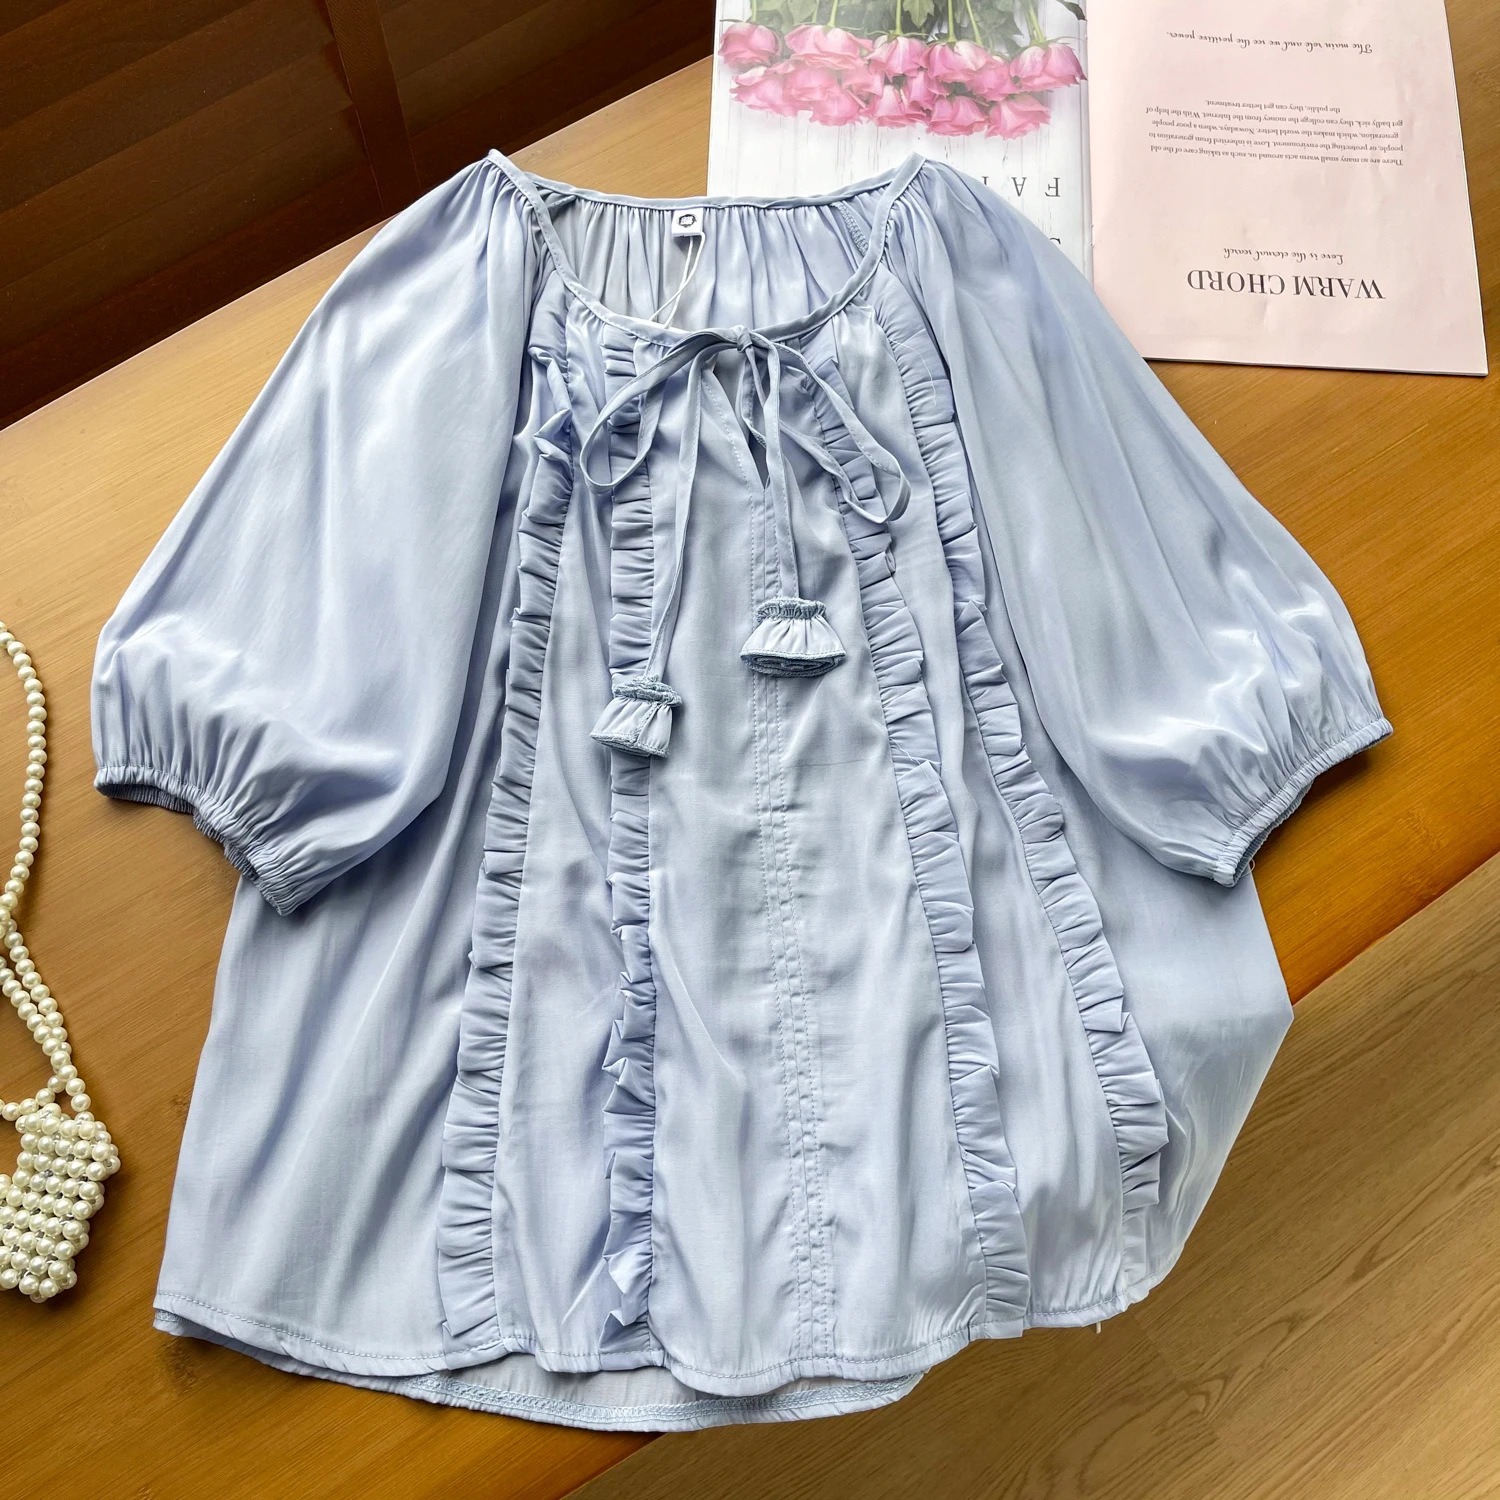 

Clothland Women Elegant Ruffled Blouse Candy Color Bow Tie Puff Sleeve Loose Style Shirt Cute Casual Tops Blusa Mujer DA549